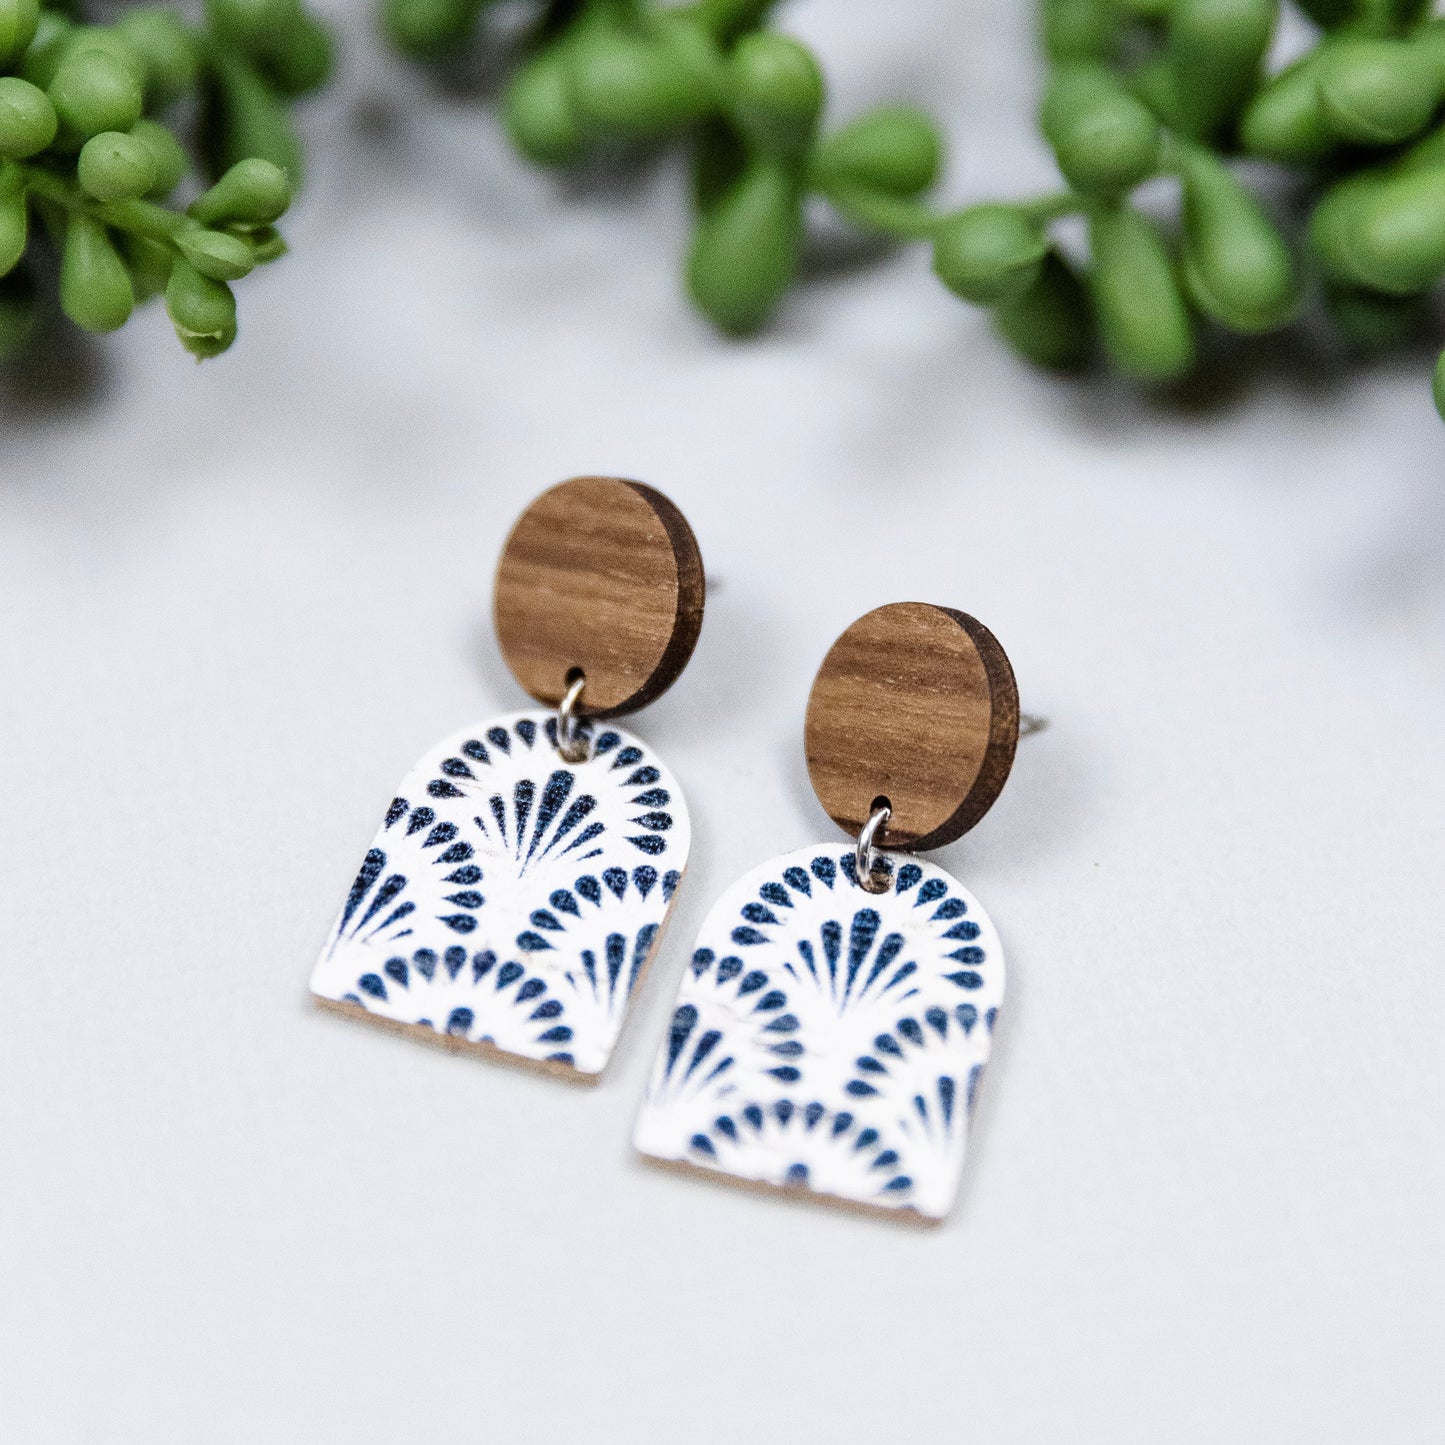 THE ARCH DANGLEin Black and White/ Walnut Wood + Cork Leather Statement Earrings